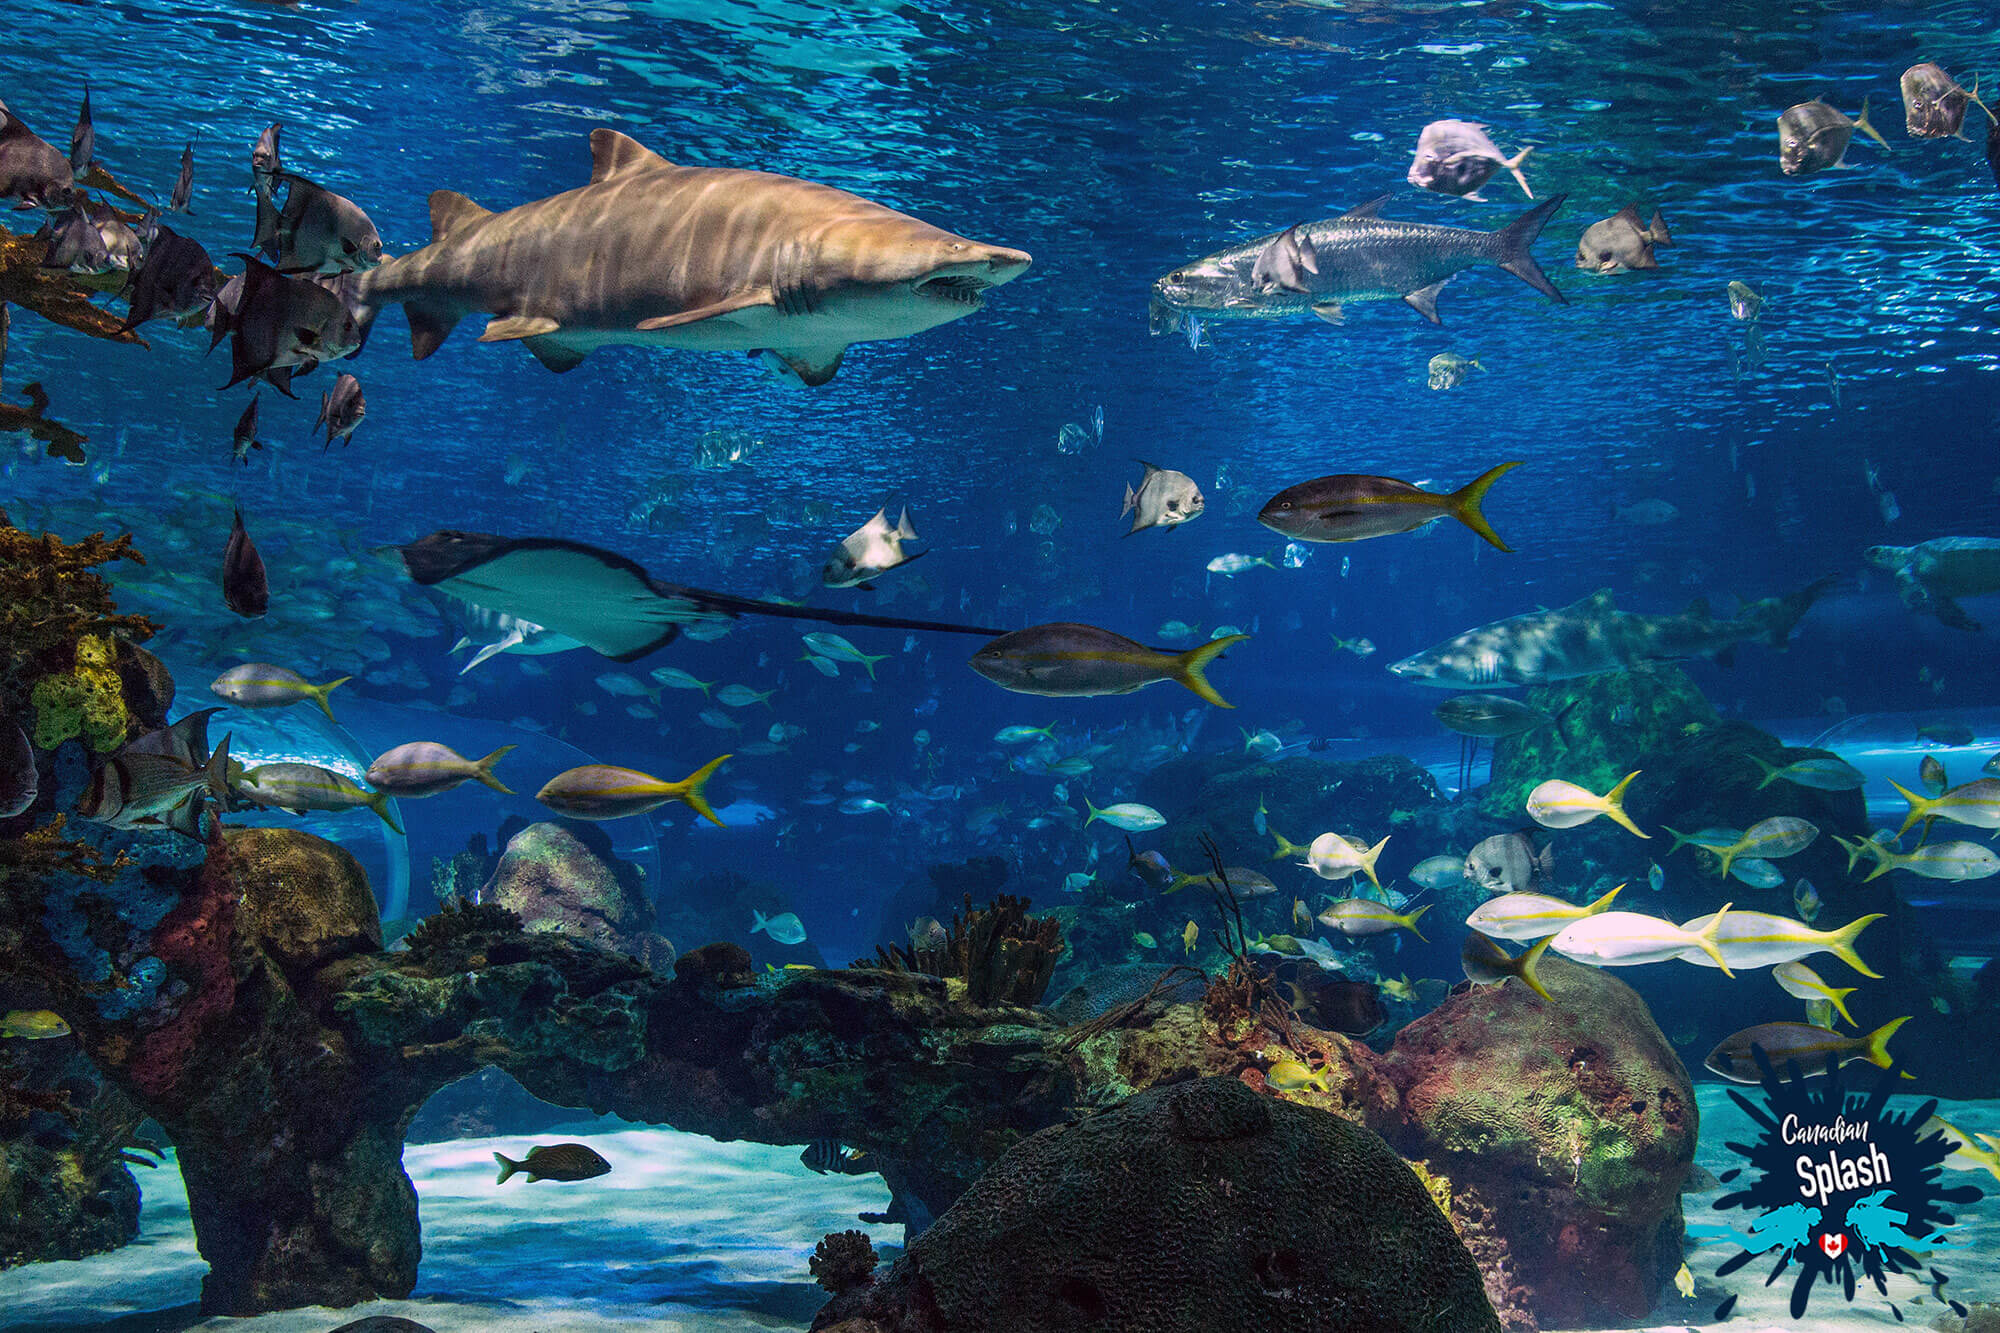 An Overview Of The Dangerous Lagoon Shark Tank At Ripley's Aquarium Of Canada, Ontario